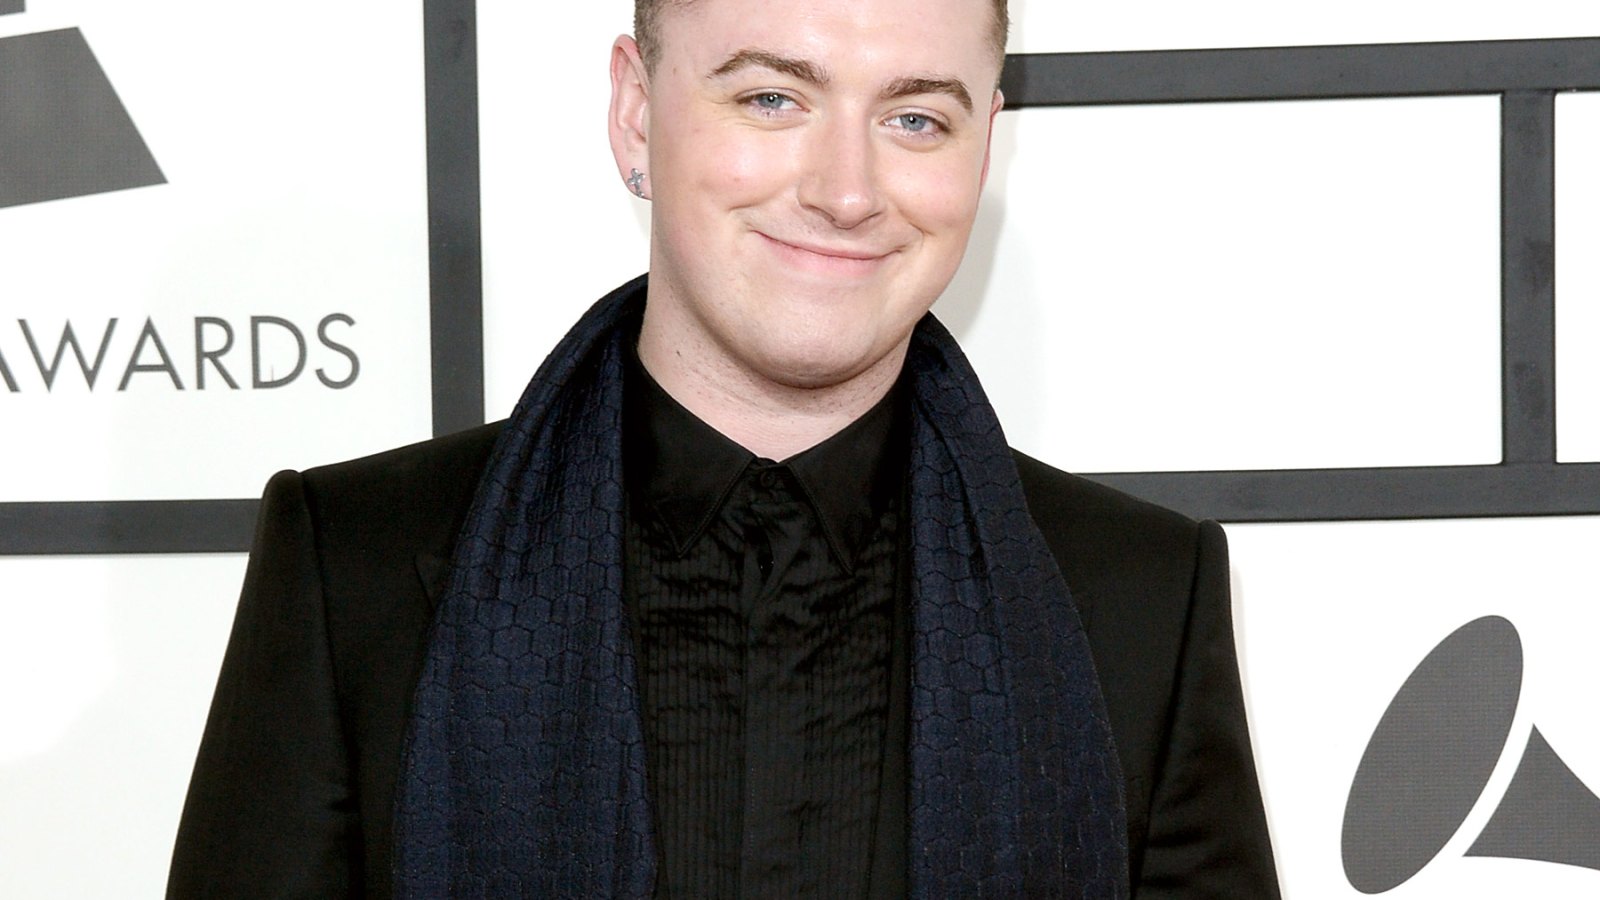 Sam Smith at the 56th GRAMMY Awards at Staples Center